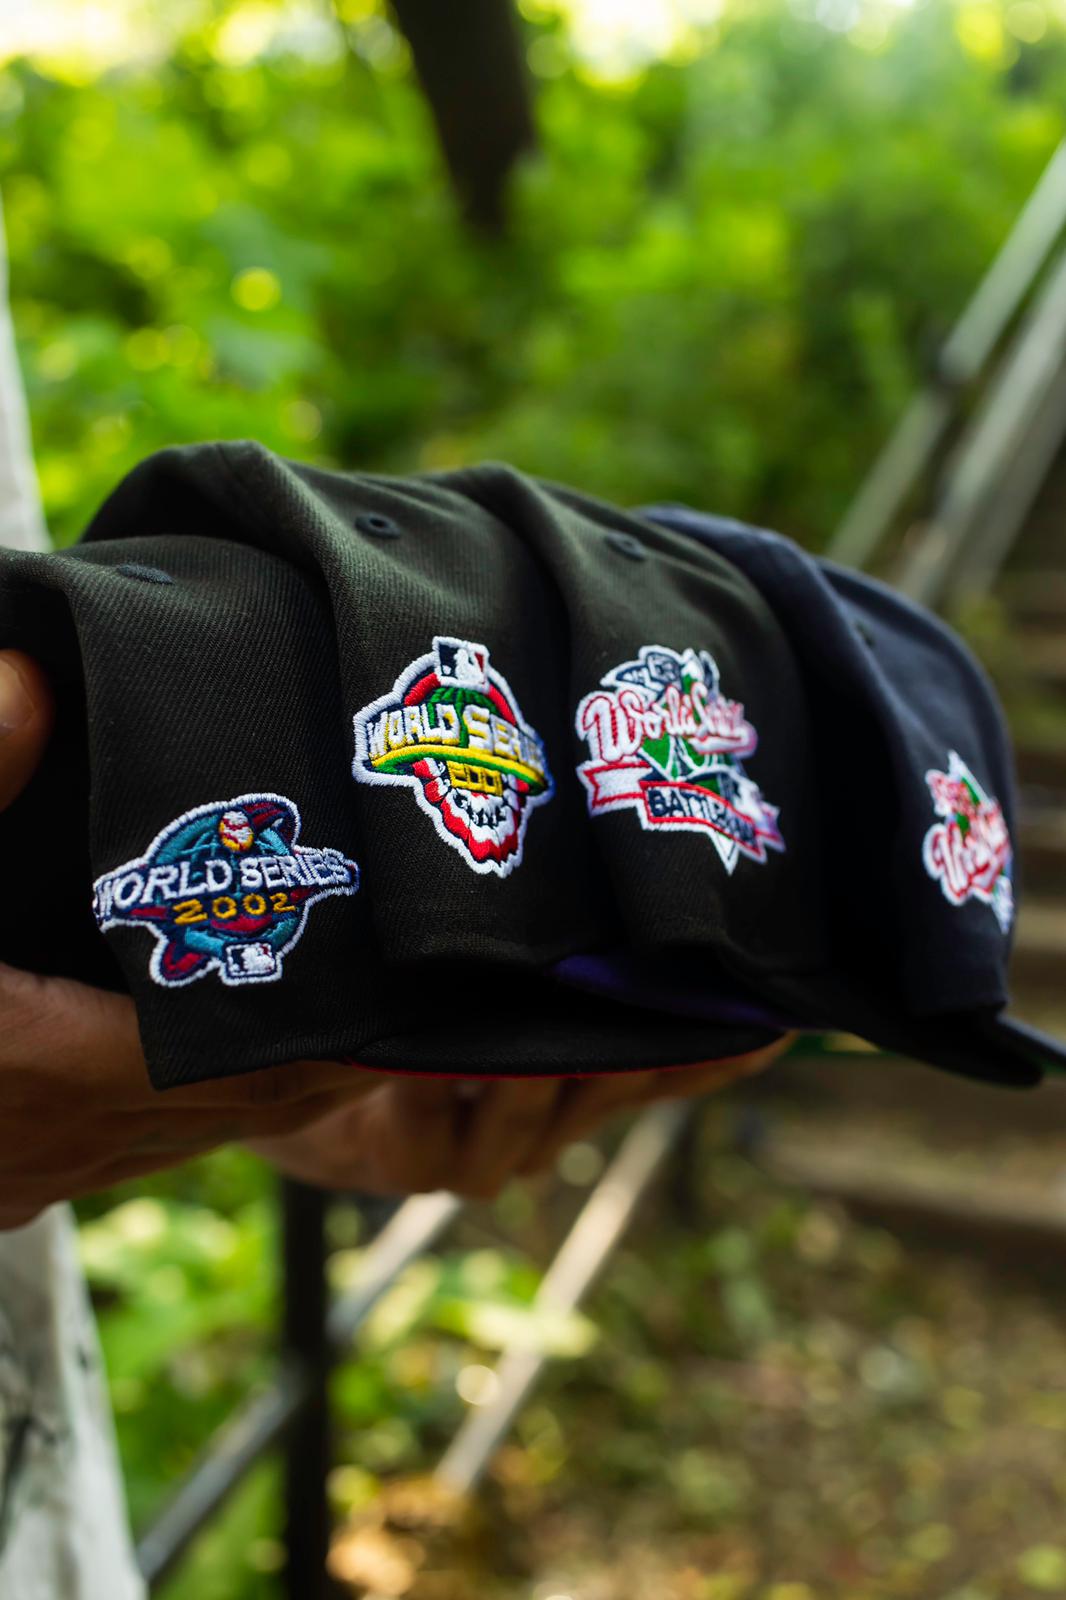 HAT CLUB on X: NOW AVAILABLE 🕚 We've got a flurry of Custom MLB World  Series patch hats! Featuring: the Blacked Out, Red Underbill 2002 Anaheim  #Angels 🥰, the Black 1989 Oakland #